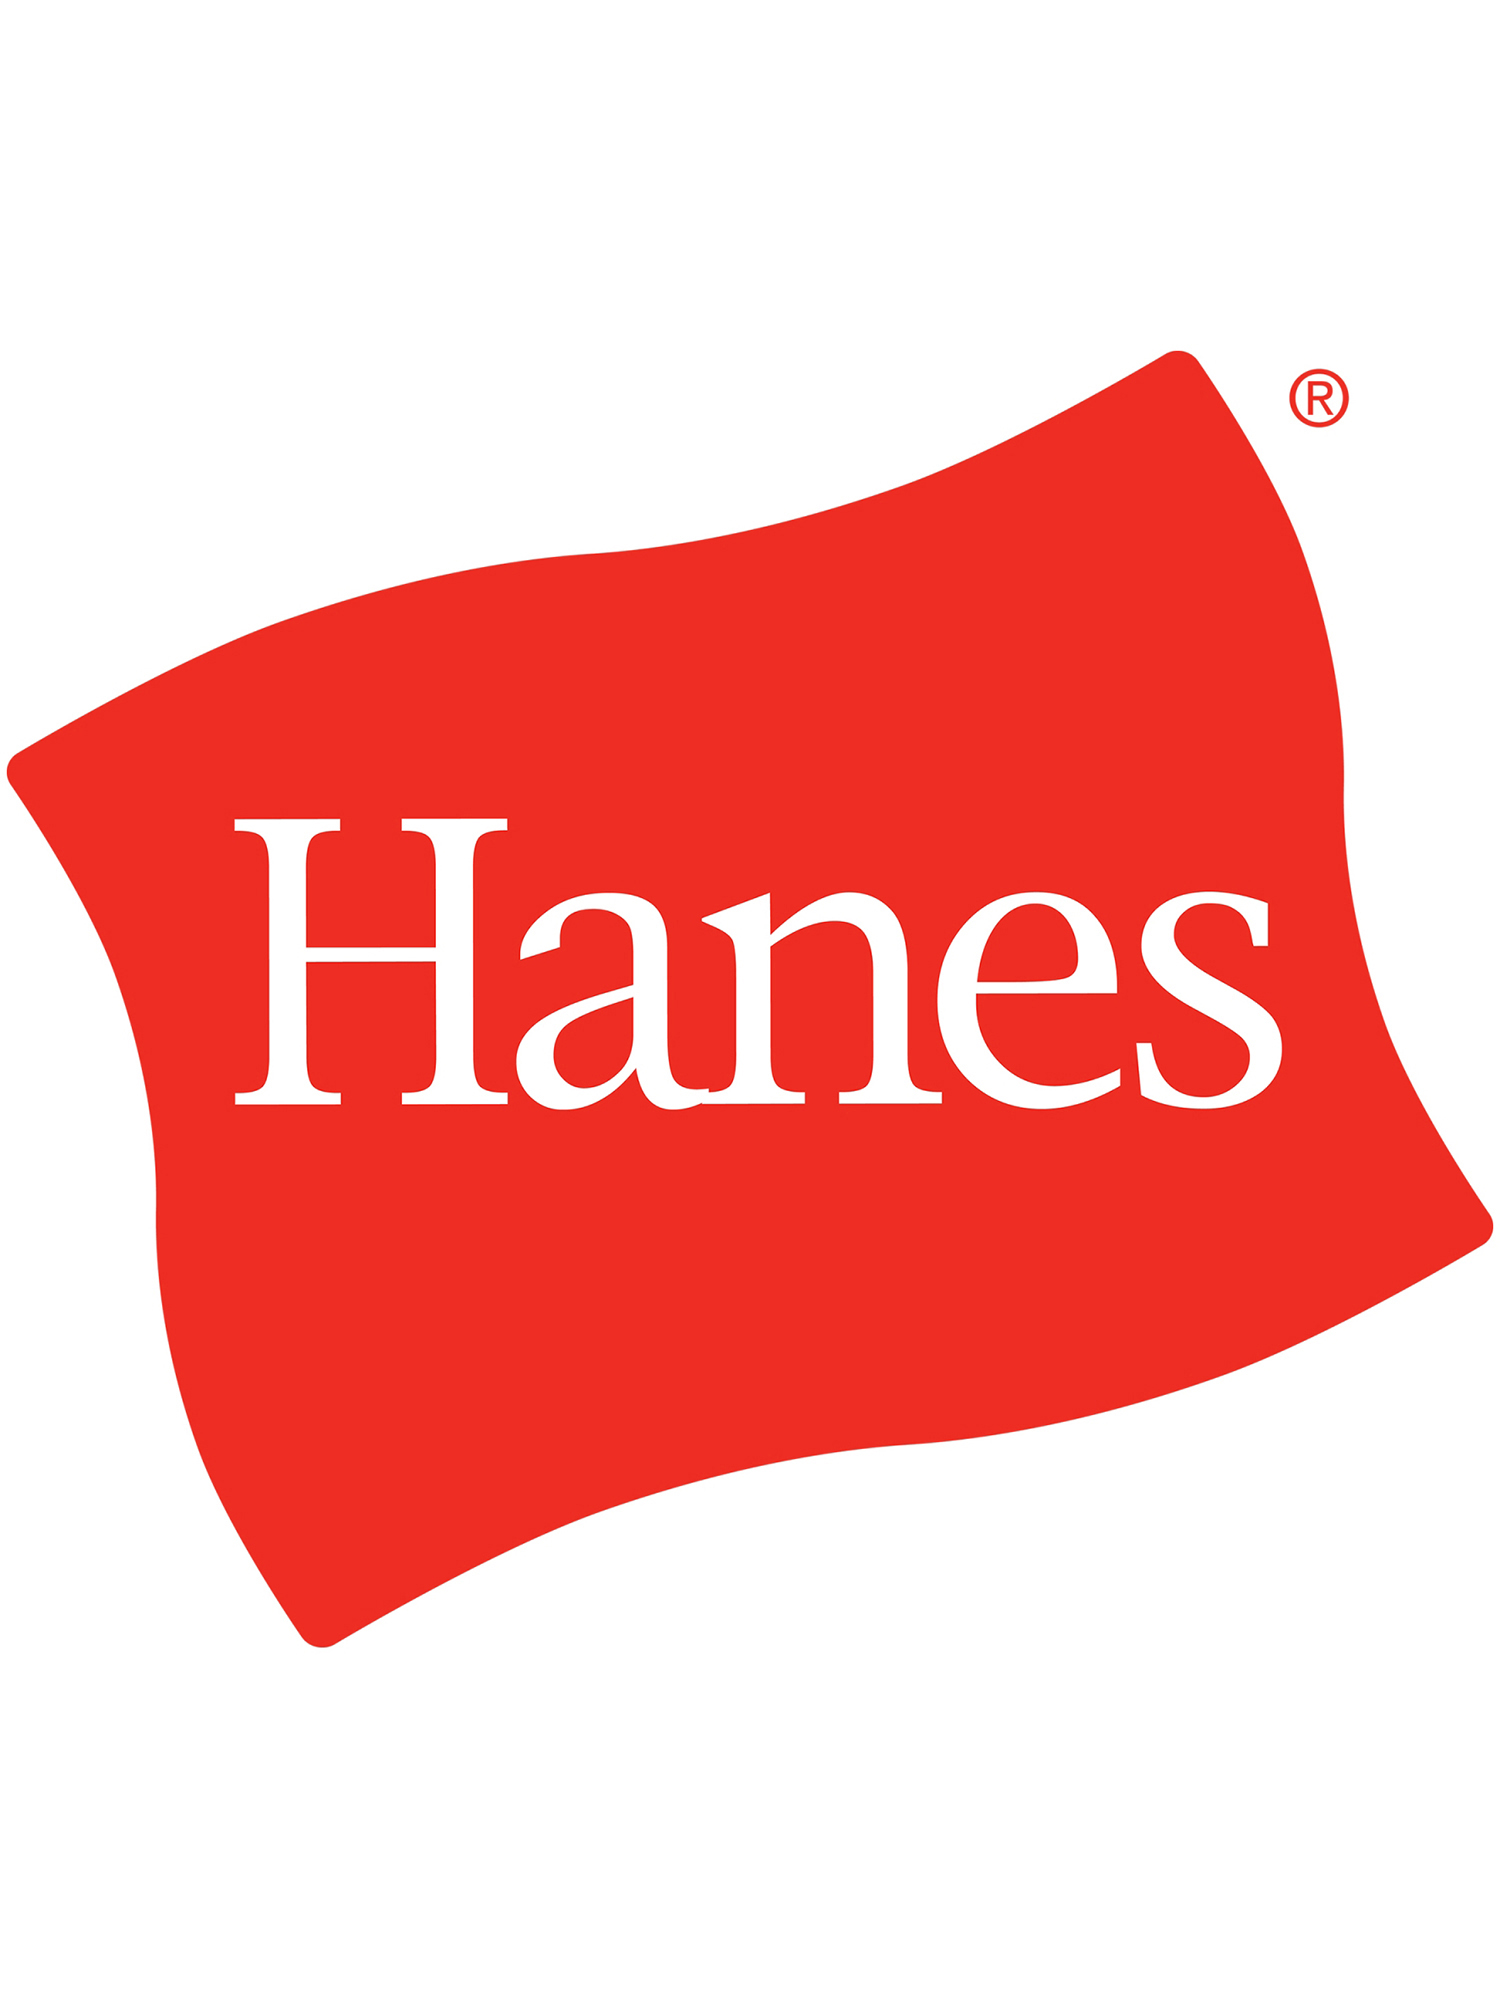 Hanes Girls Socks, 10 Pack Low Cut, Sizes S - L - image 3 of 4